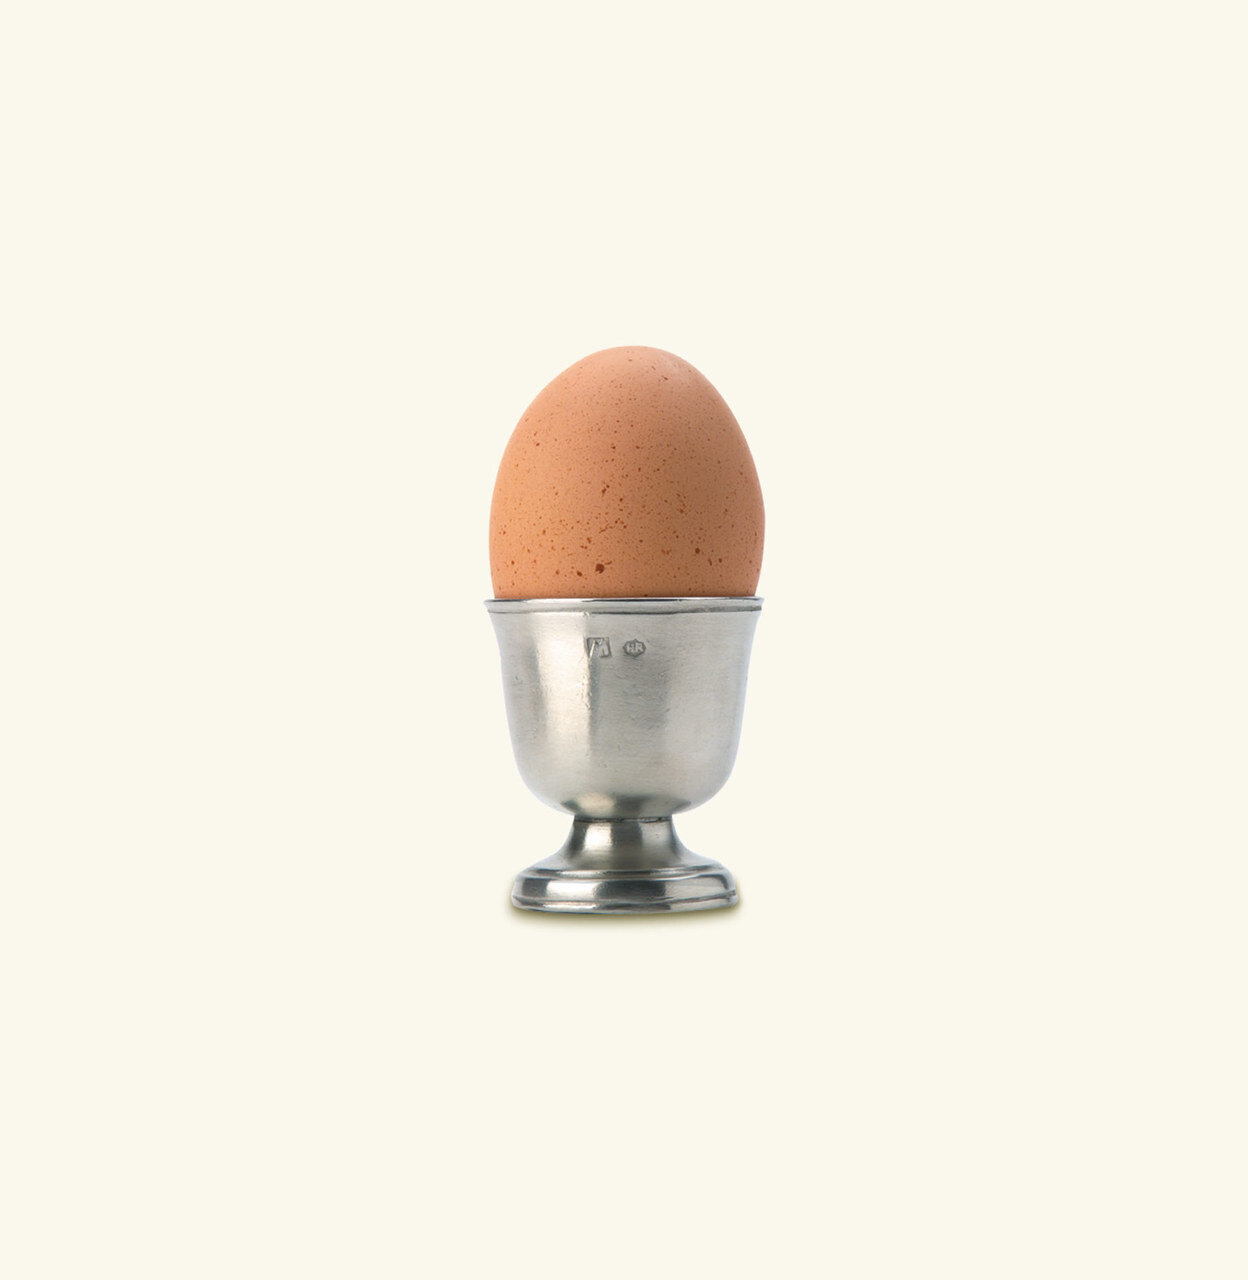 Match Pewter Footed Egg Cup a550.0